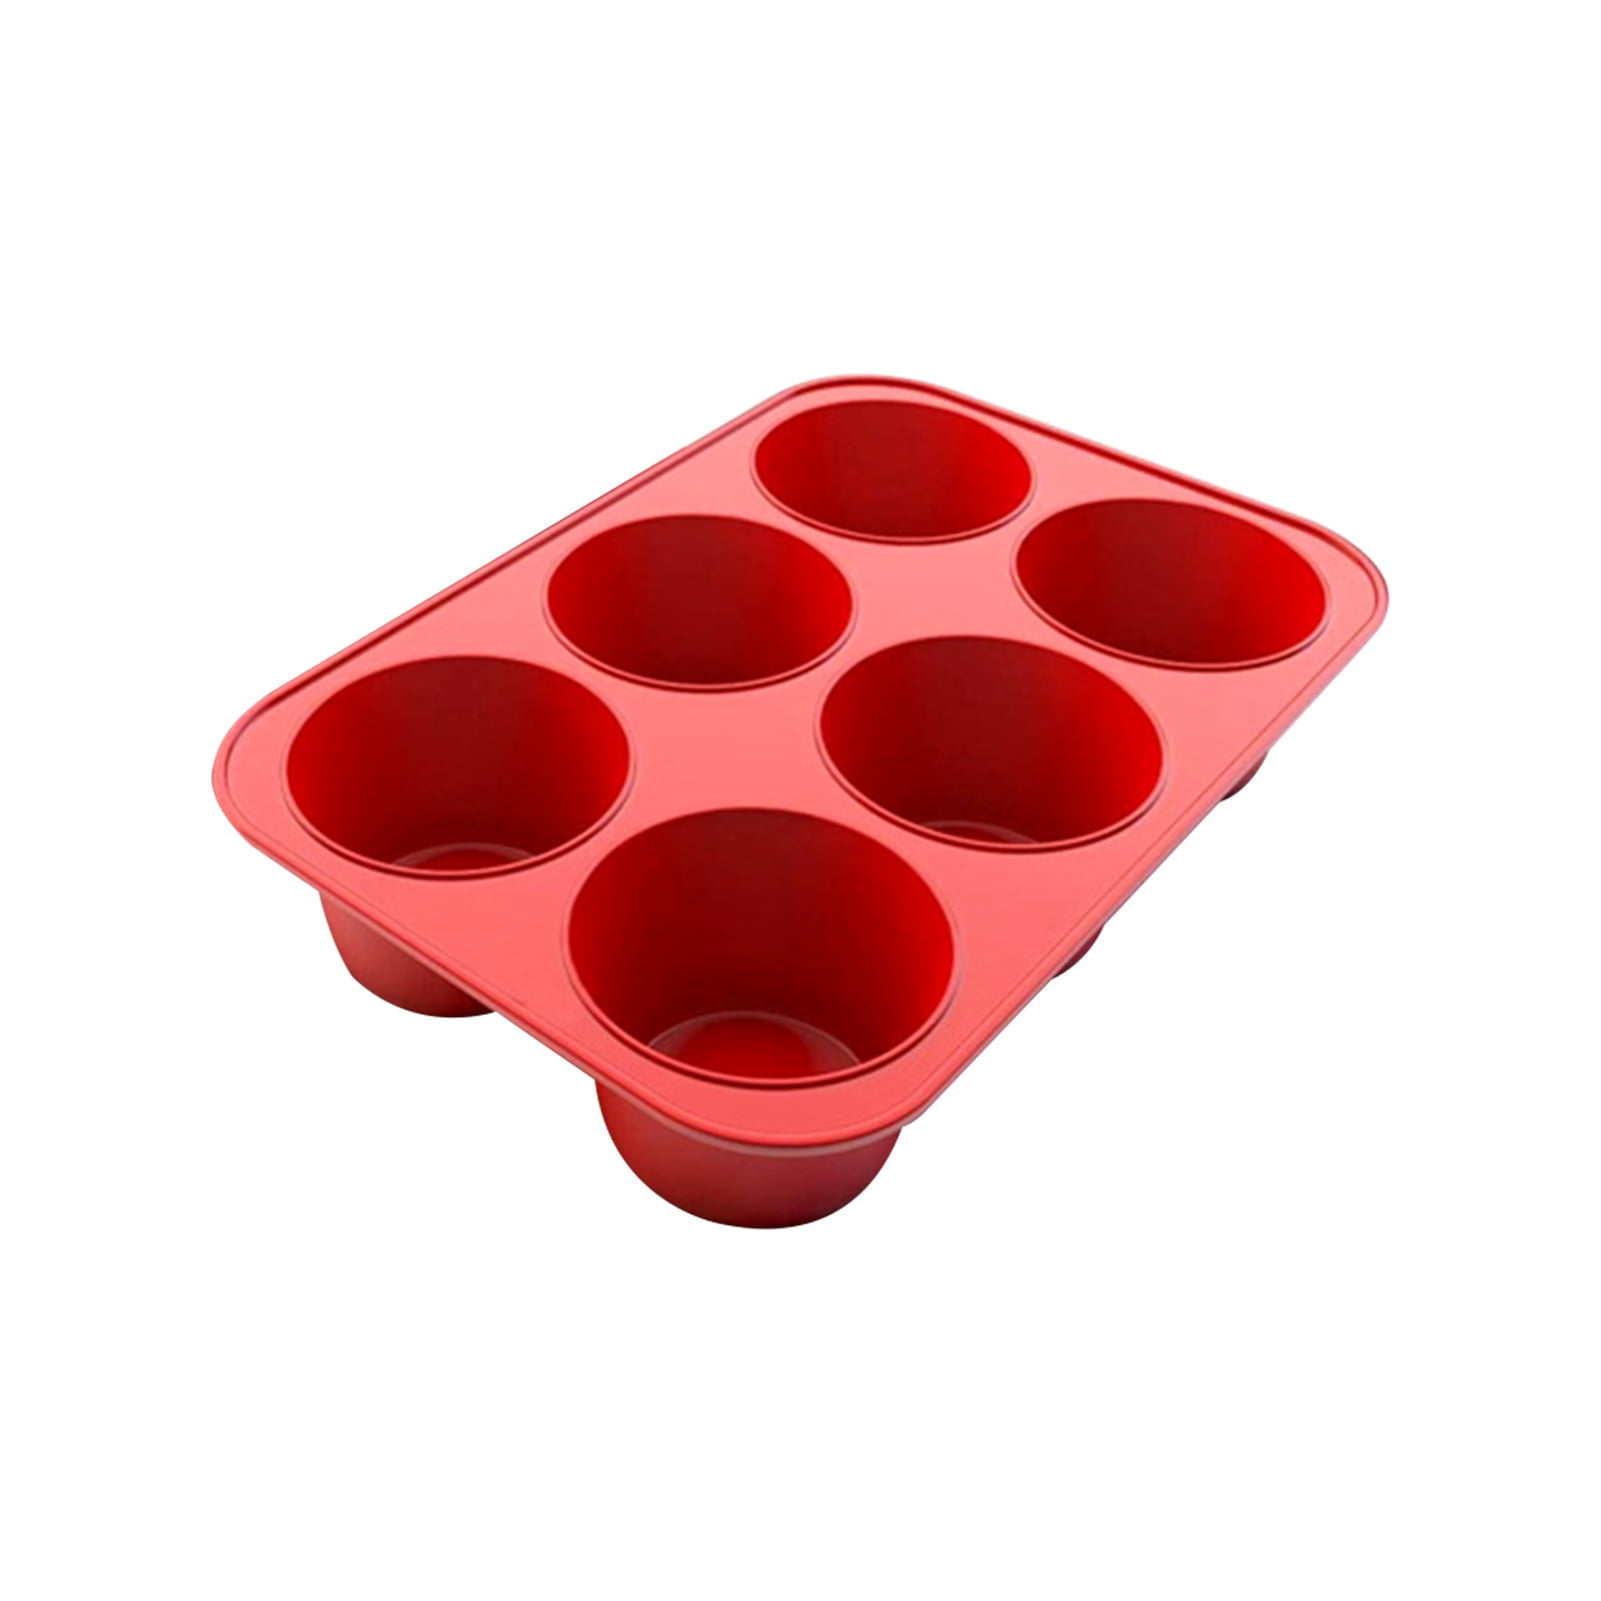 8 SILICONE LARGE MUFFIN YORKSHIRE PUDDING MOULD CUPCAKE BAKING TRAY BAKEWARE